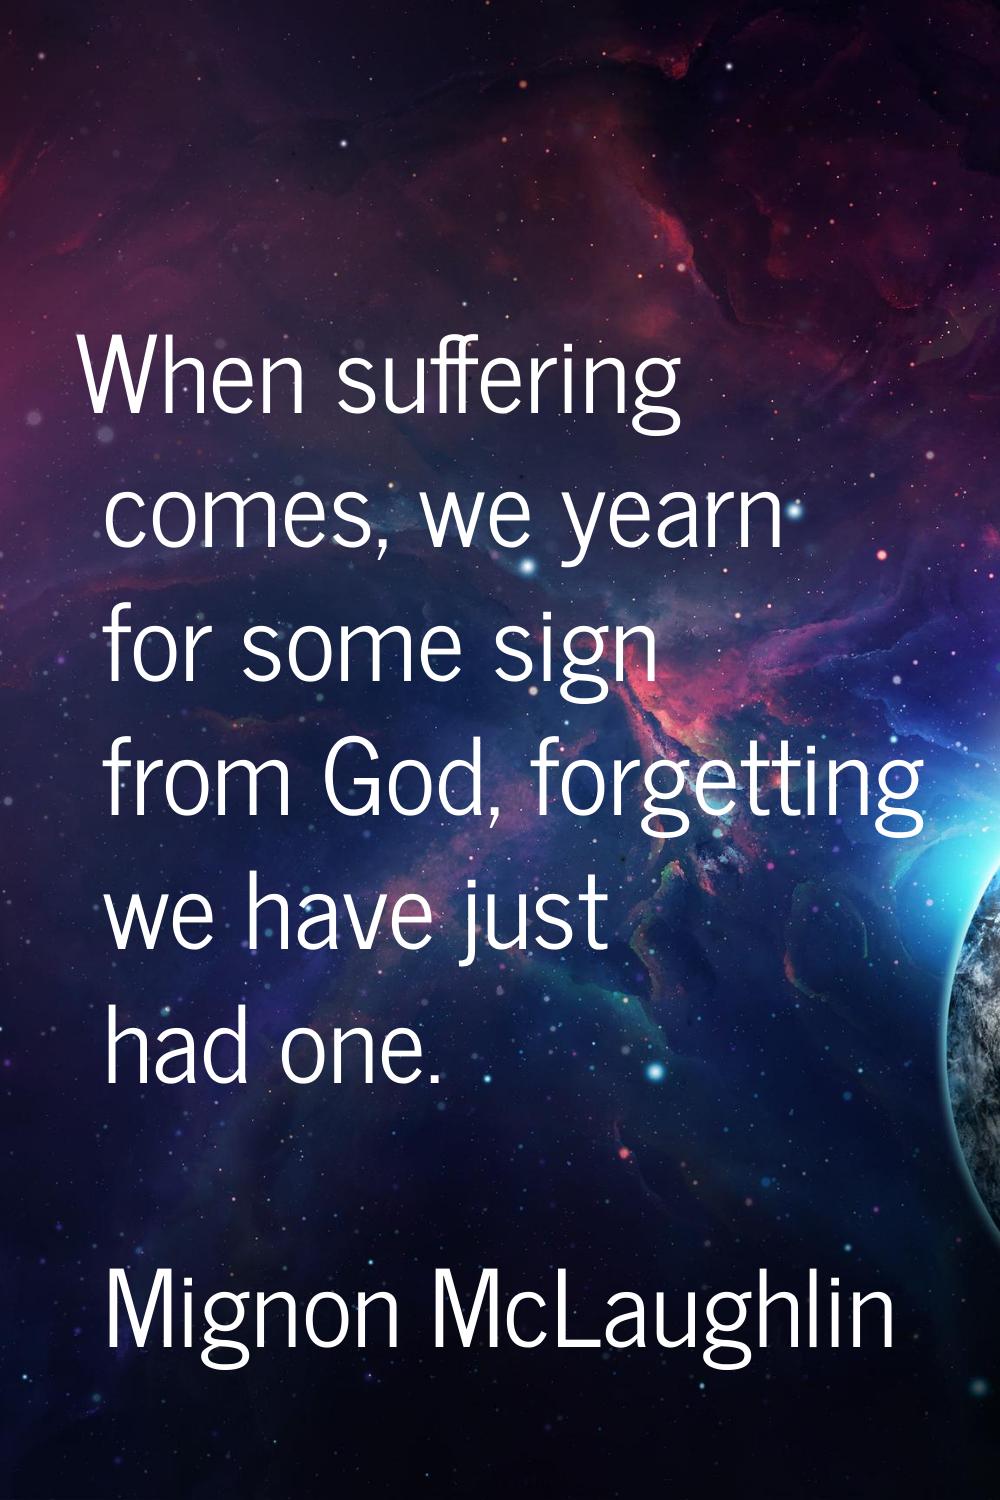 When suffering comes, we yearn for some sign from God, forgetting we have just had one.